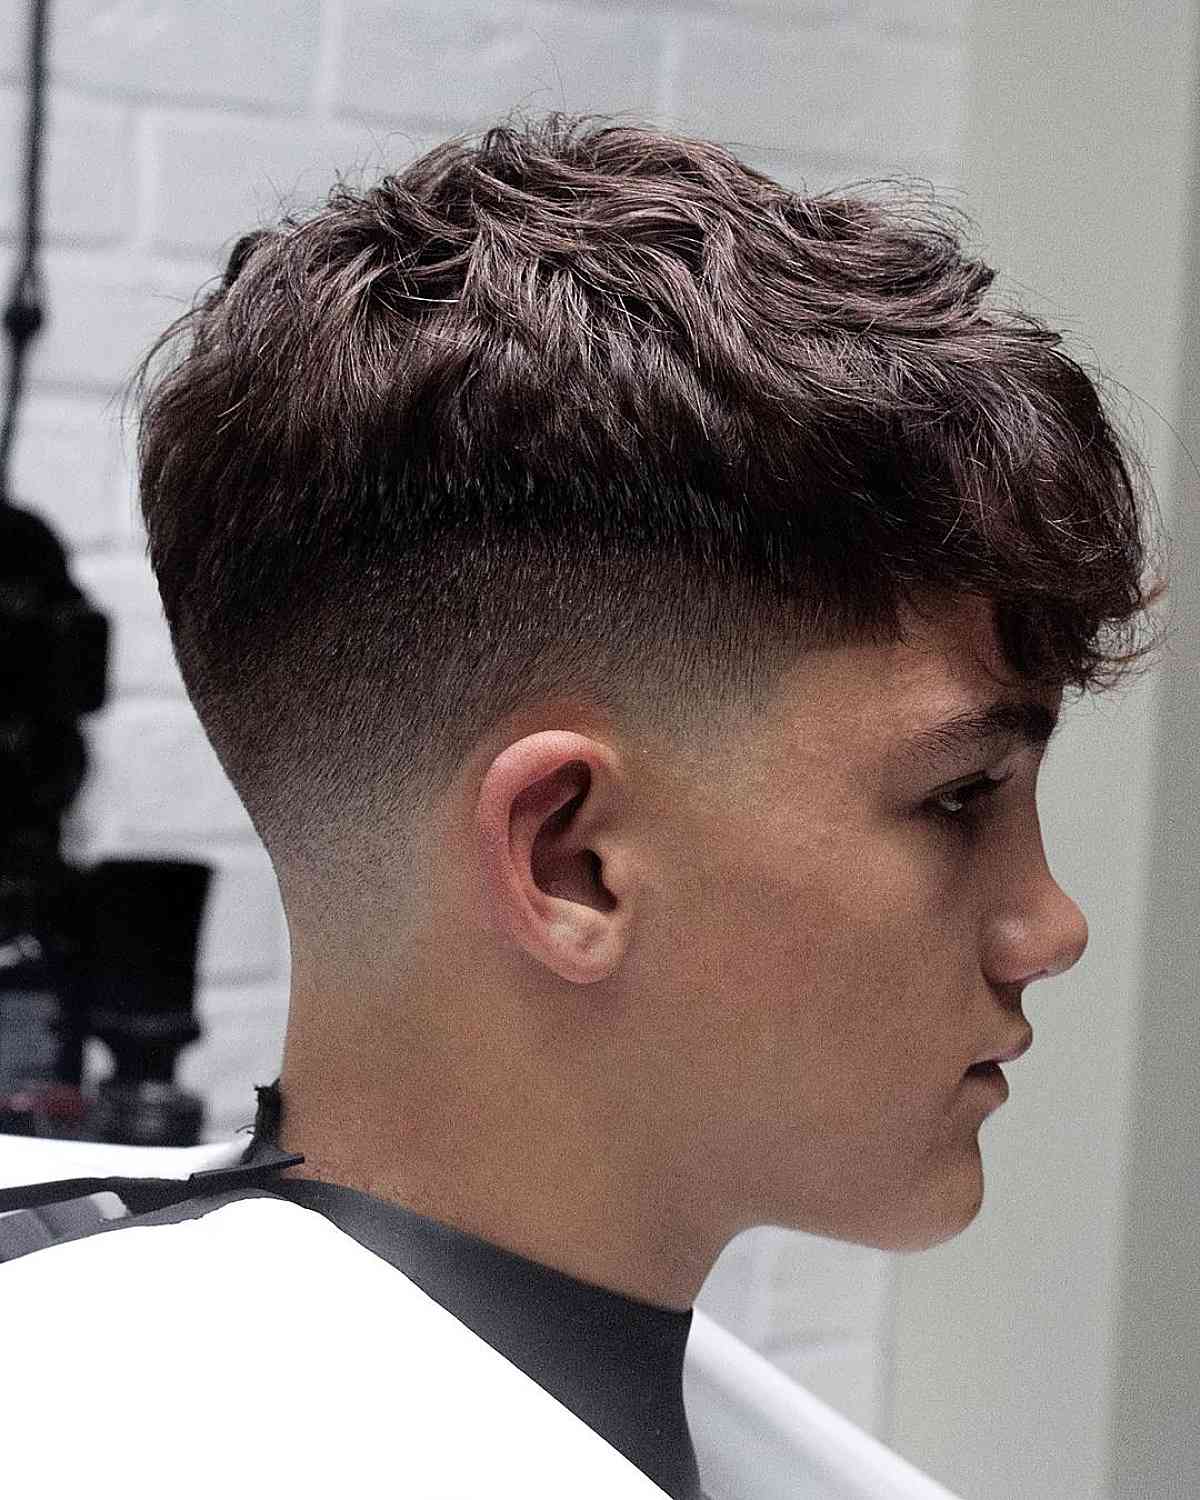 Top 15 Side Fade Haircuts for Men That Are Dead On